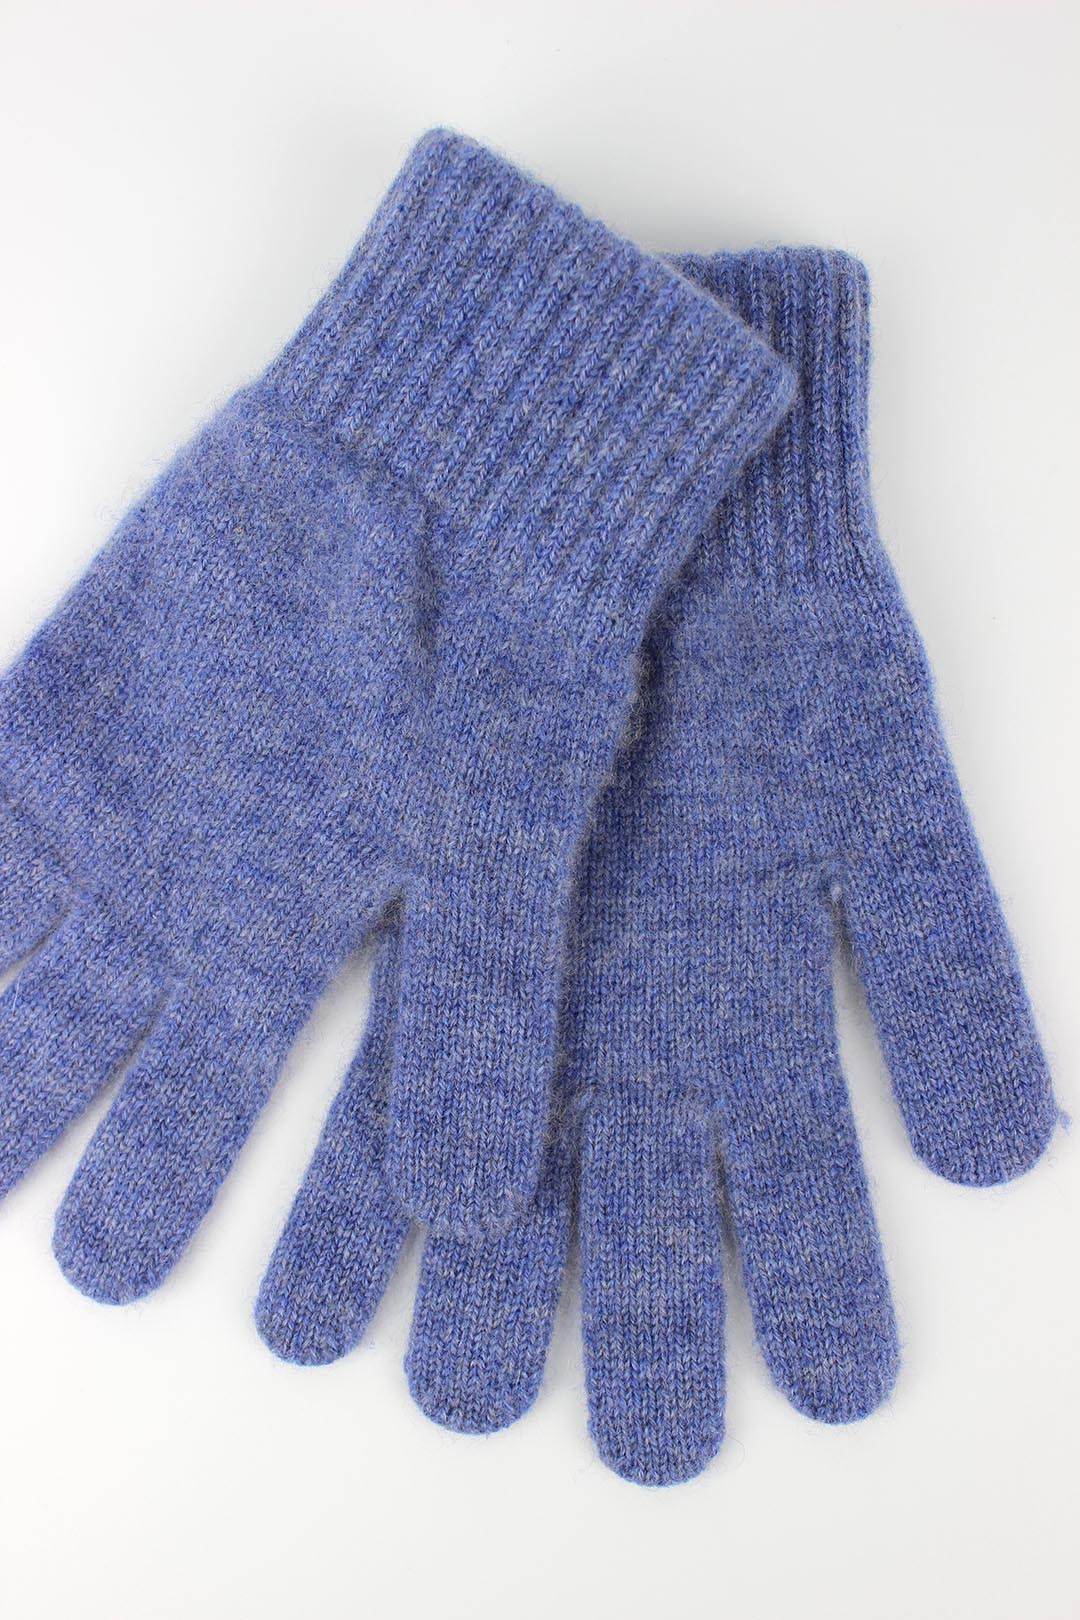 Cashmere gloves in shades of blue. Knitted in the Scottish borders